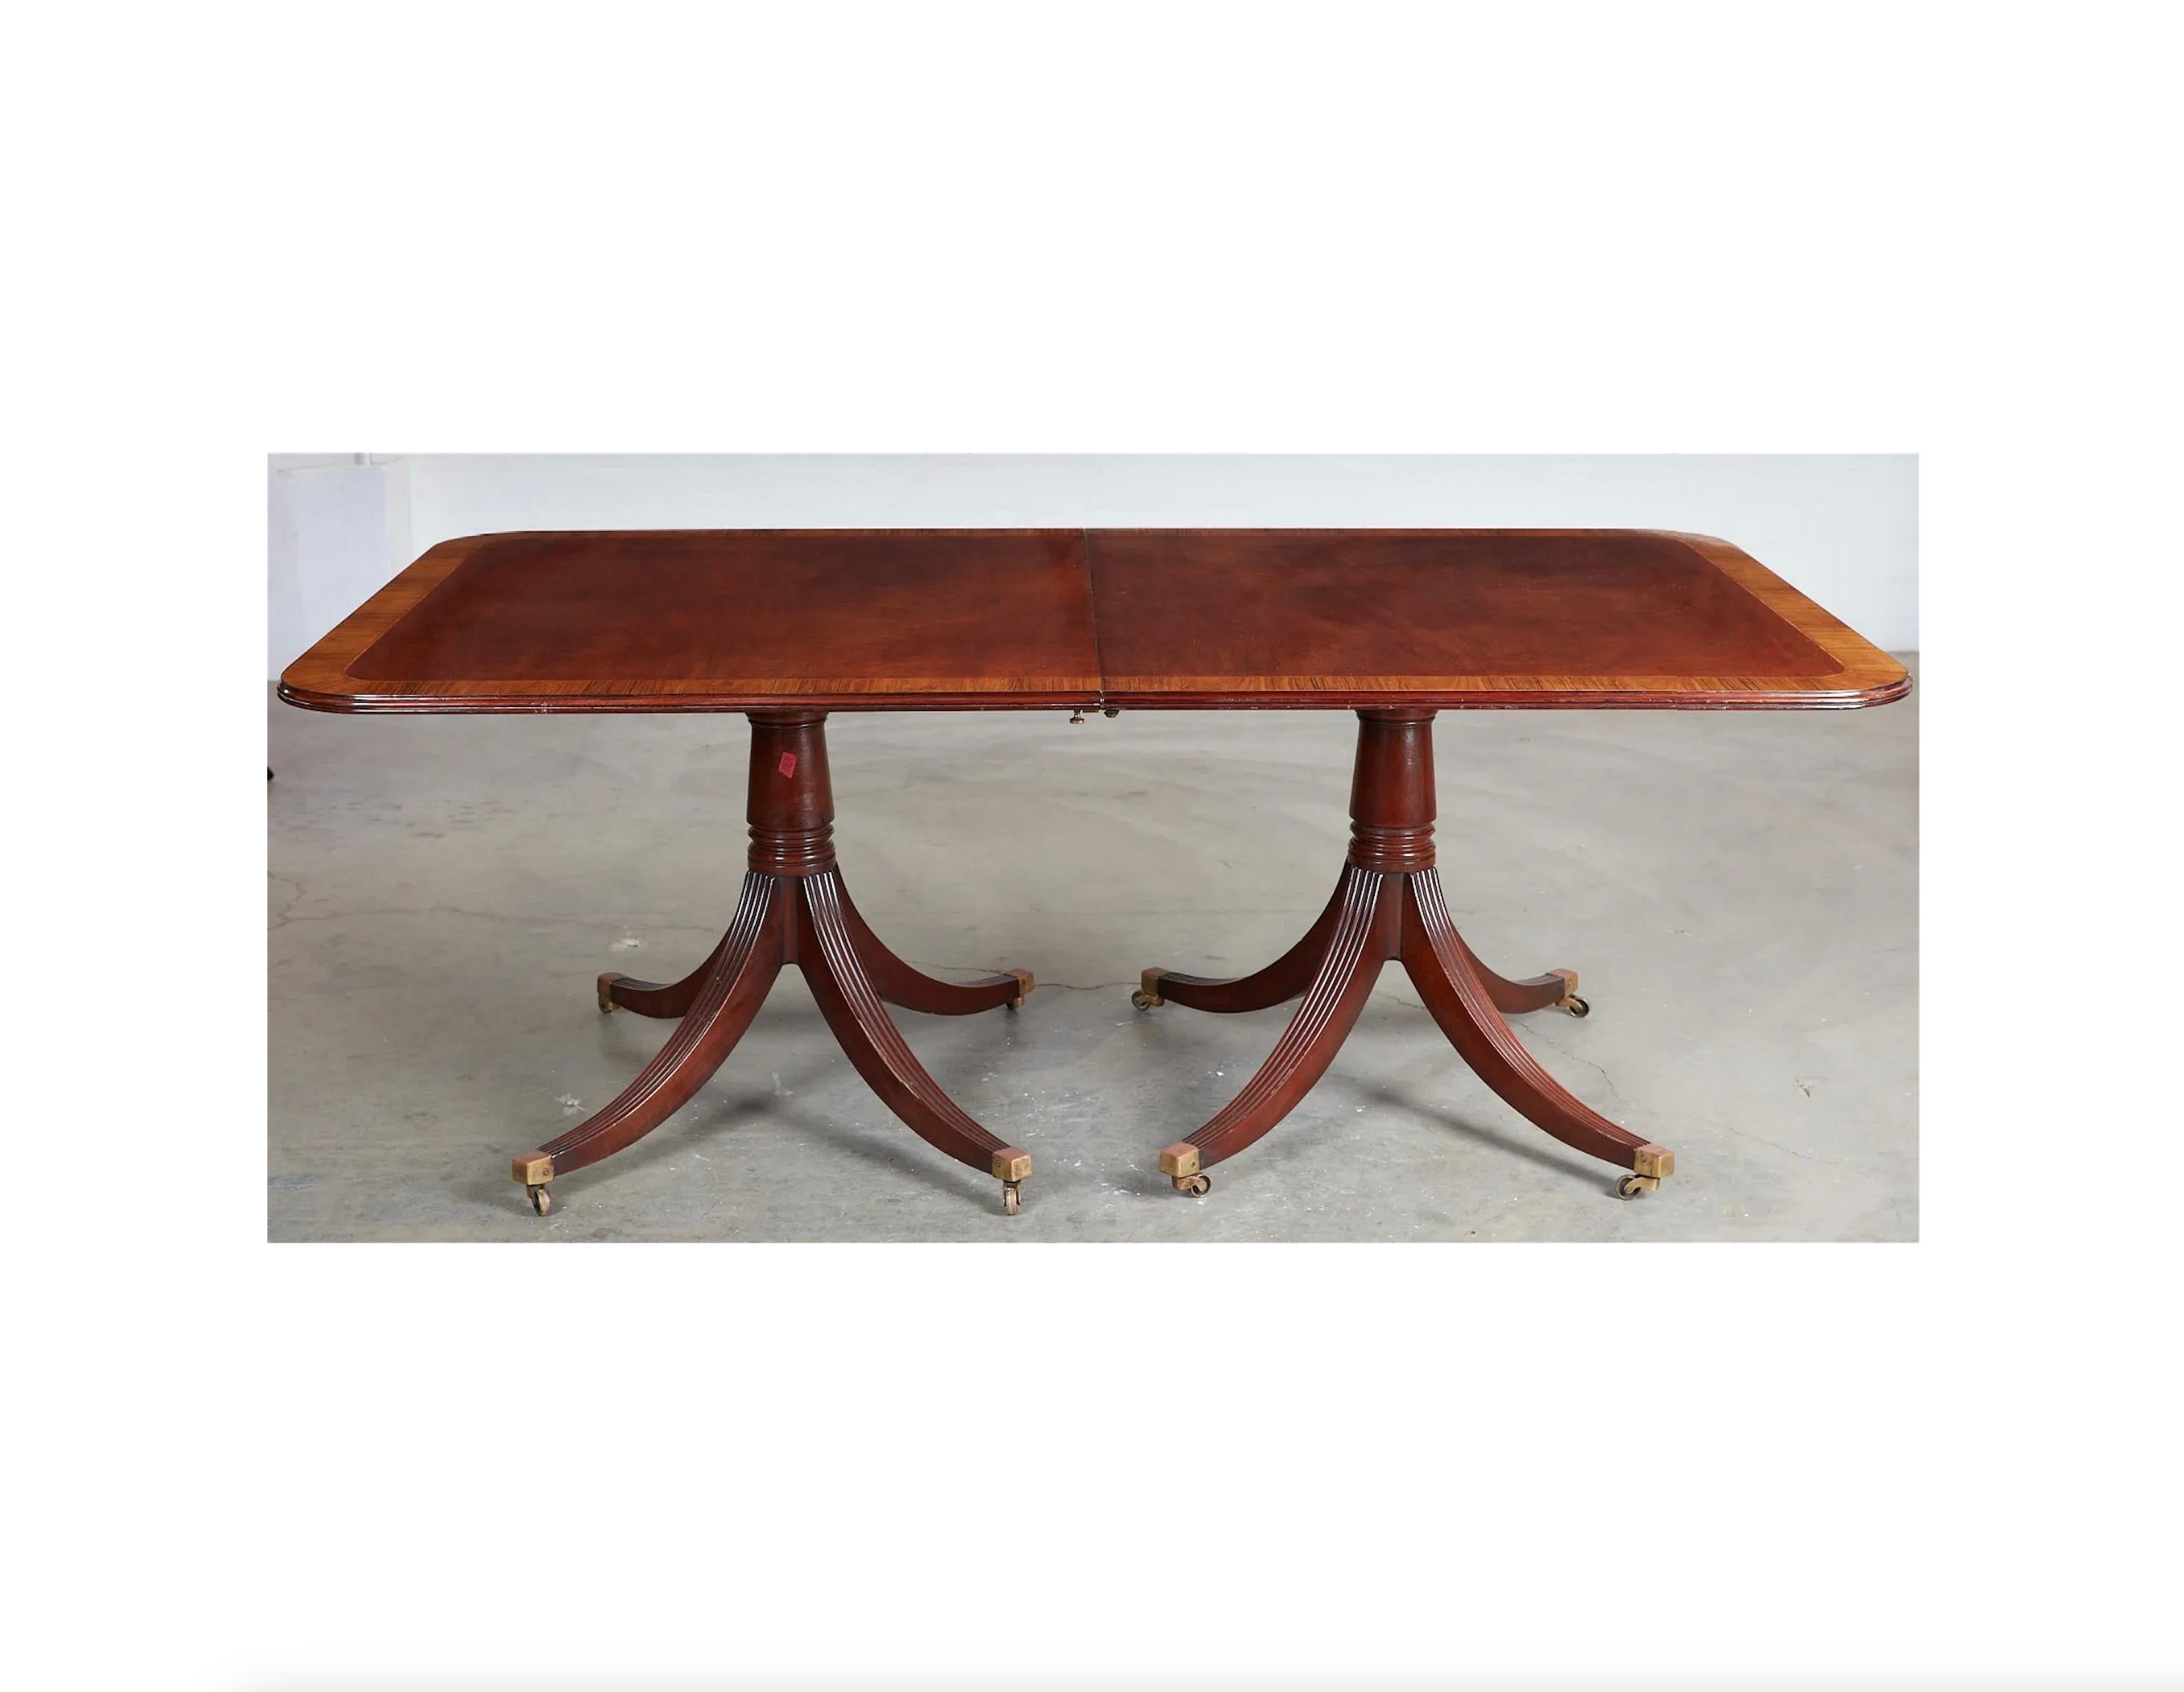 20th Century English Georgian Double Pedestal Mahogany Dining Table  For Sale 2